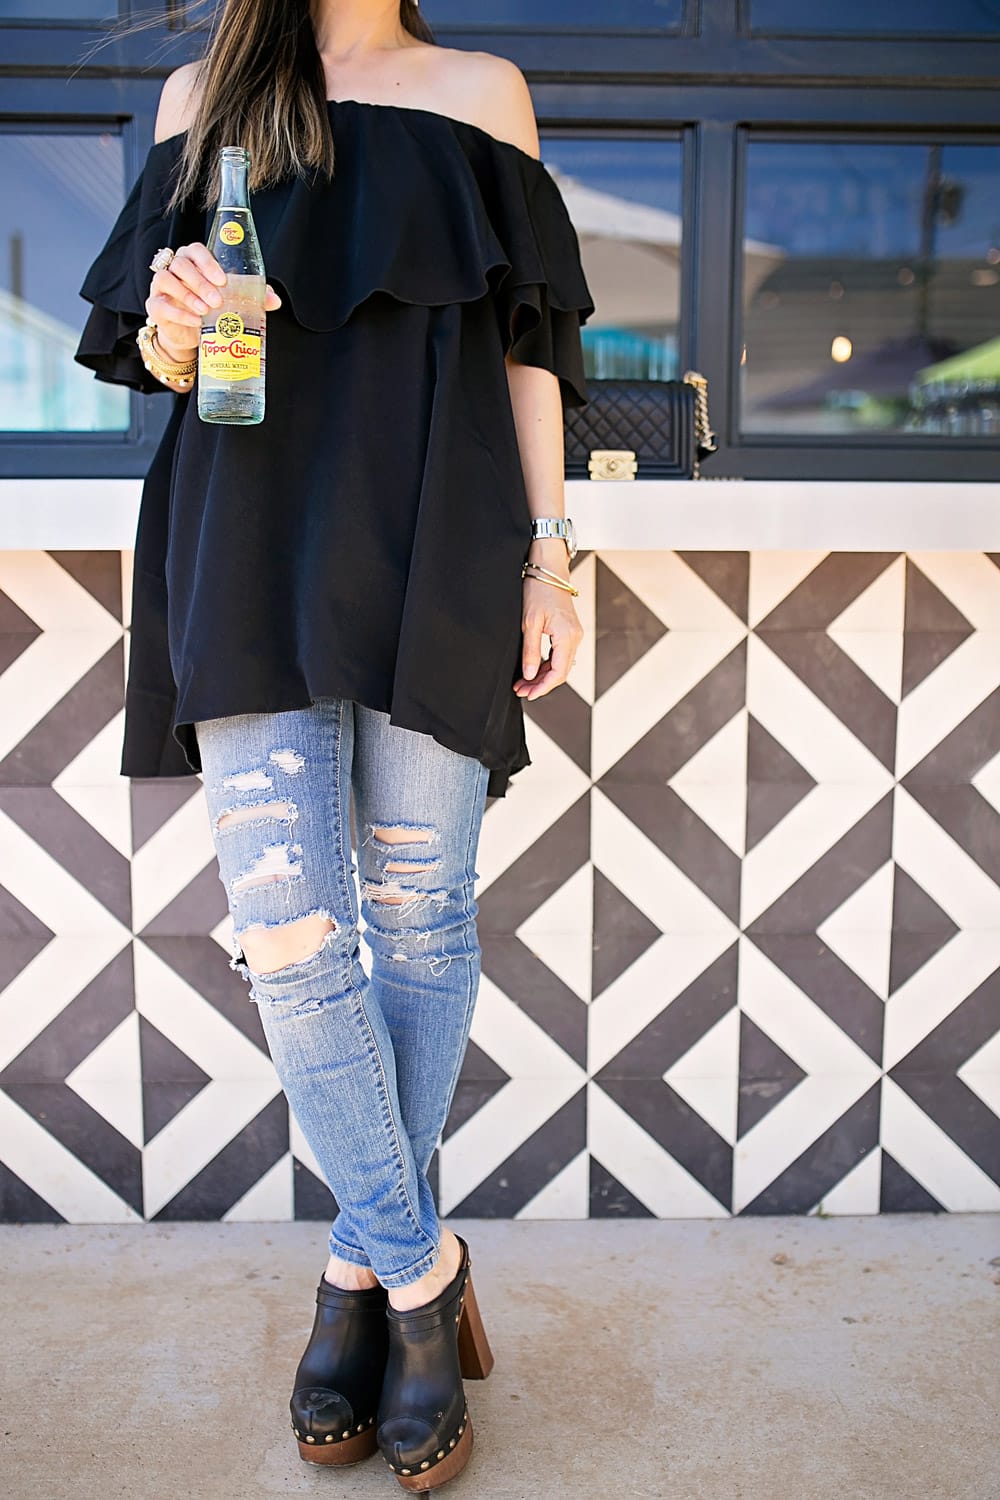 topo chico mineral water off the shoulder black ruffle top ripped jeans chanel platform clogs